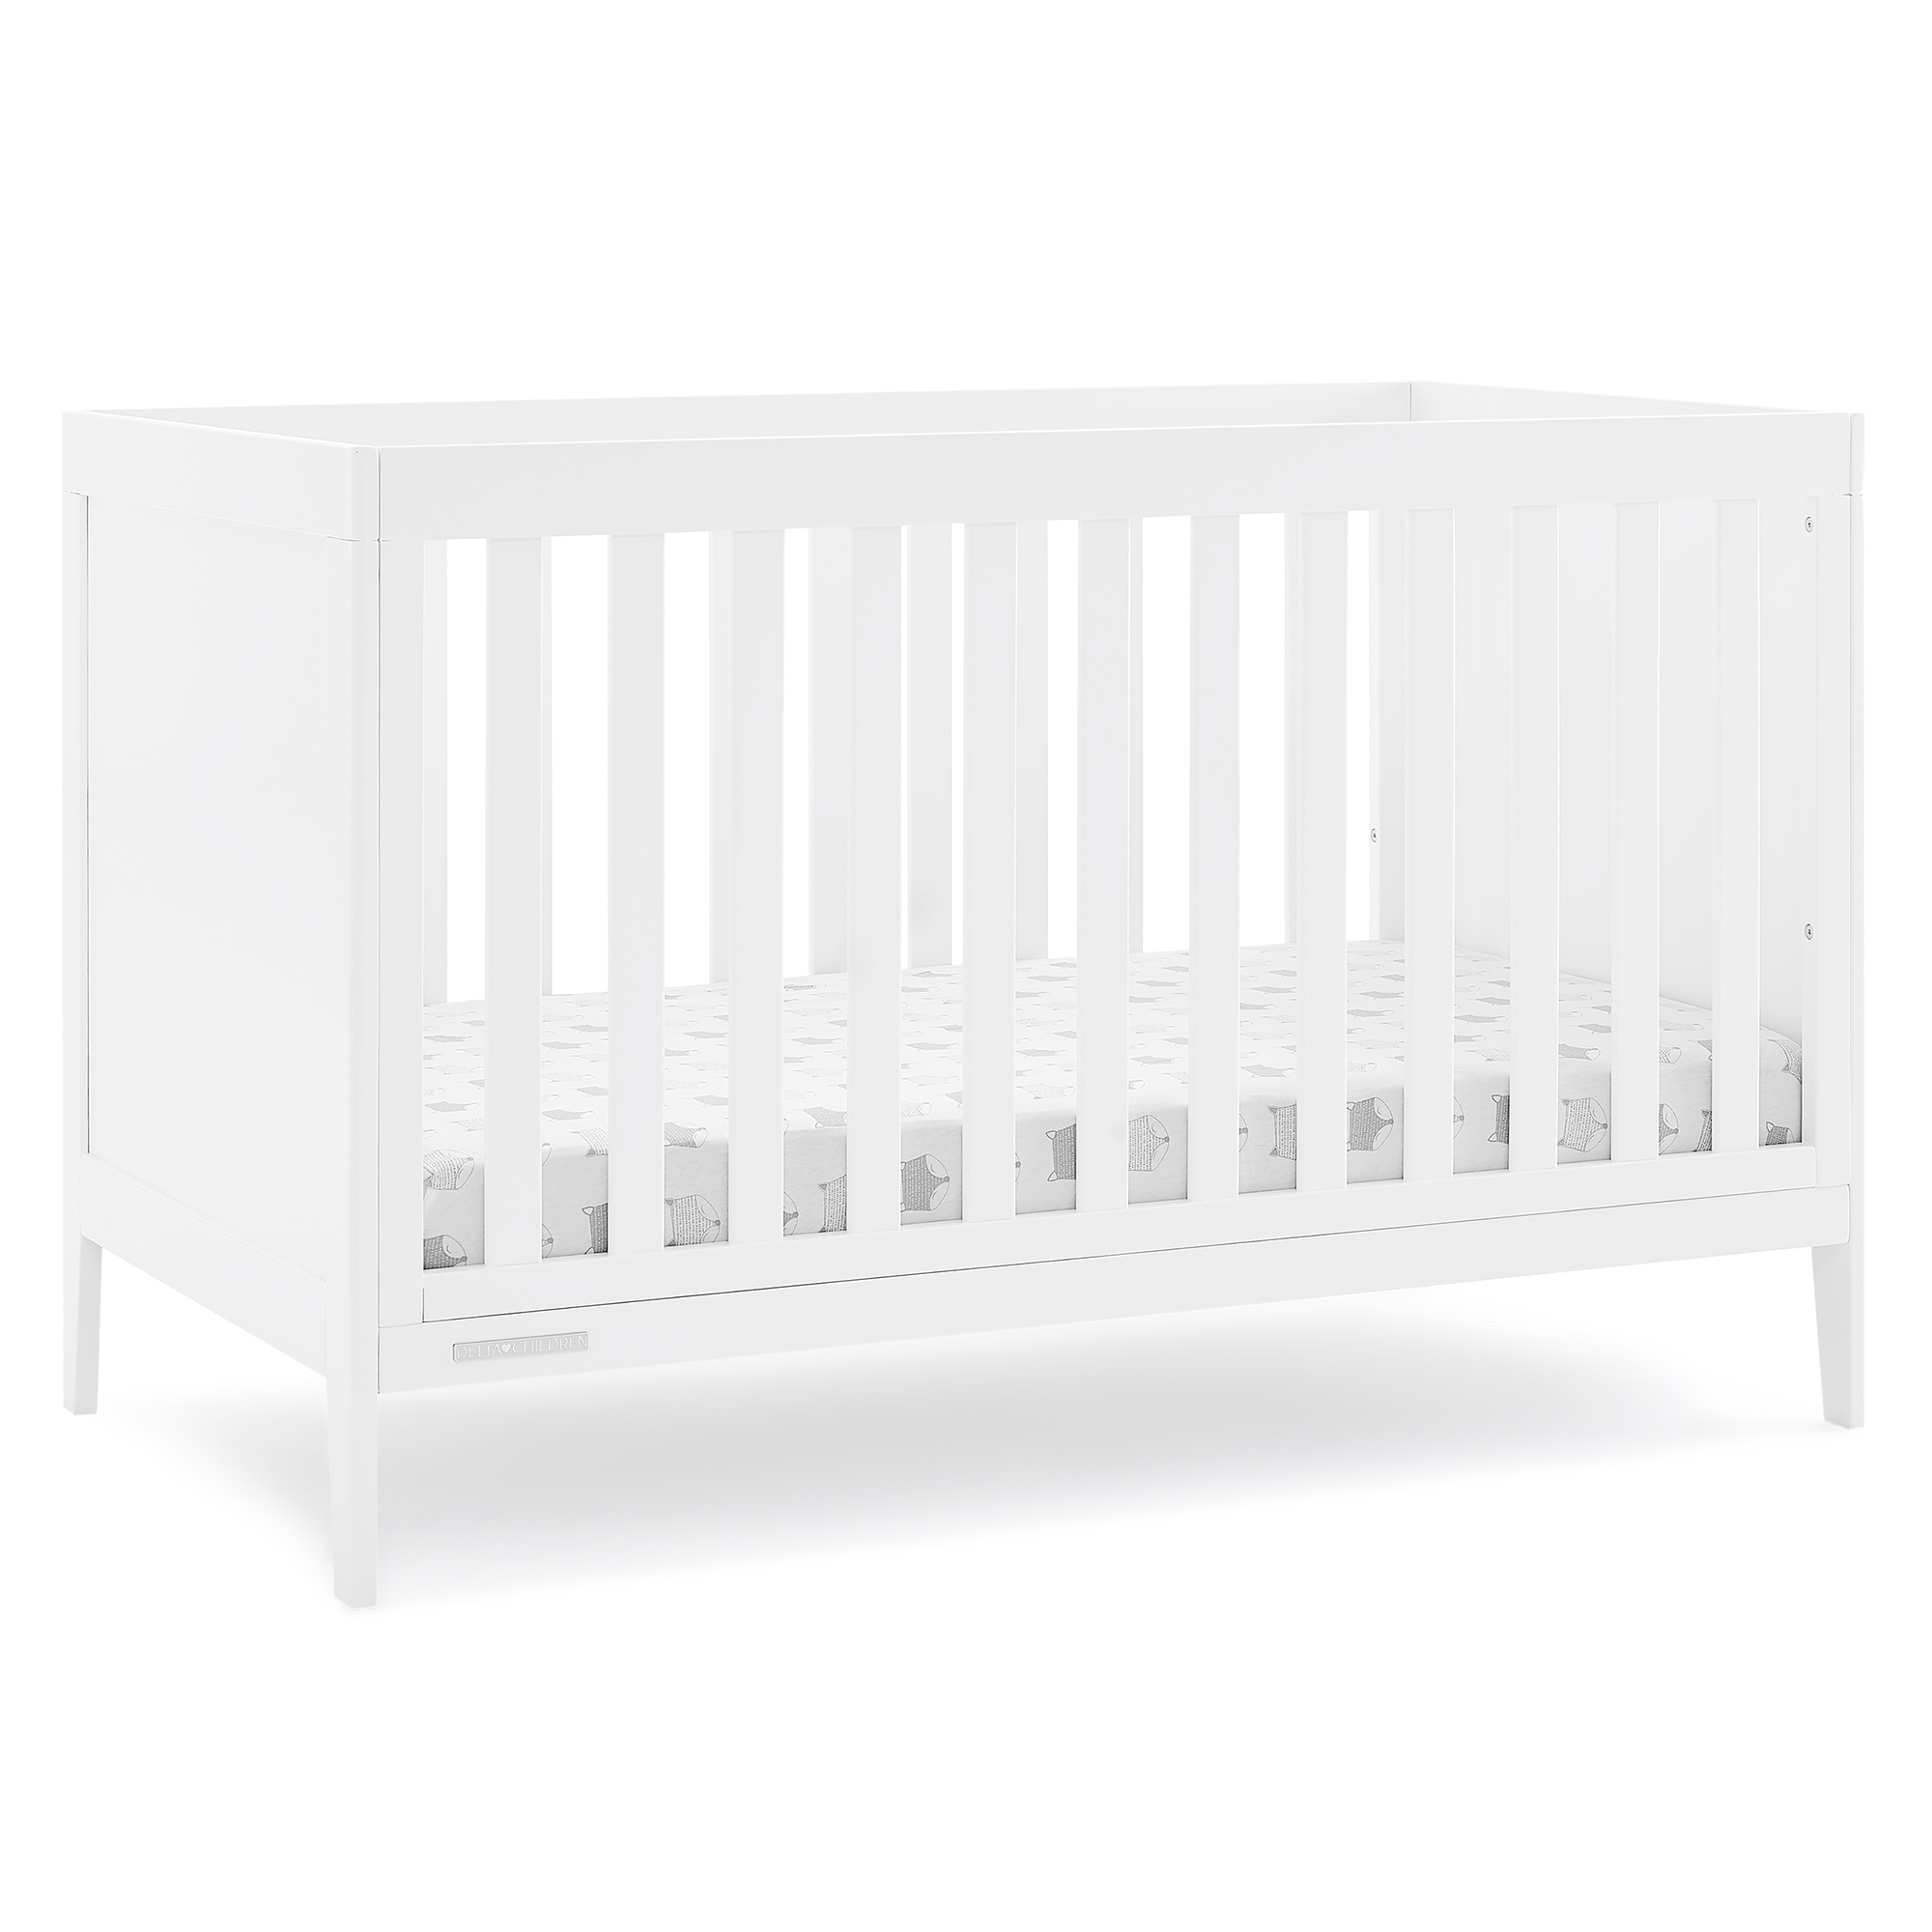 Delta Children Hayes 4-in-1 Convertible Baby Crib - Greenguard Gold Certified, Bianca White - image 1 of 15